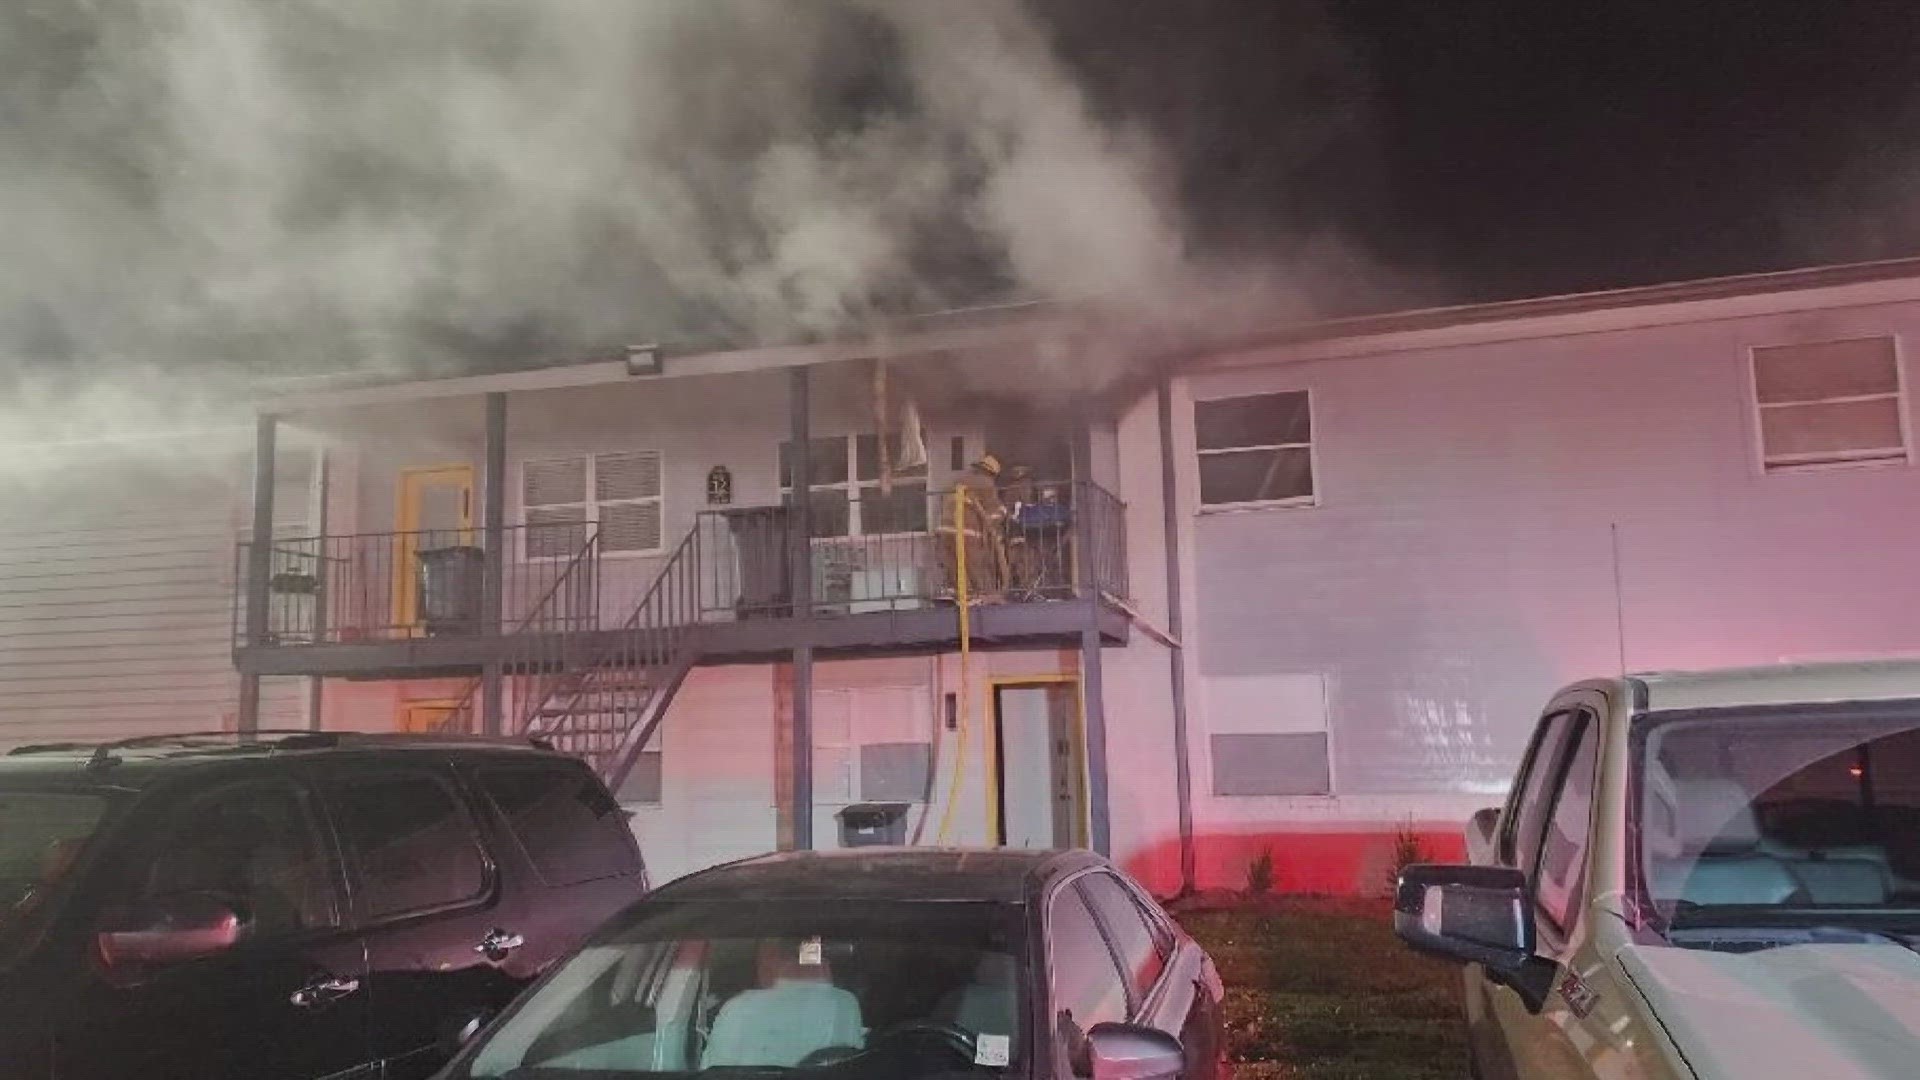 The fire started in a second-floor unit in the Summerfield Apartment complex, McAuliffe said.